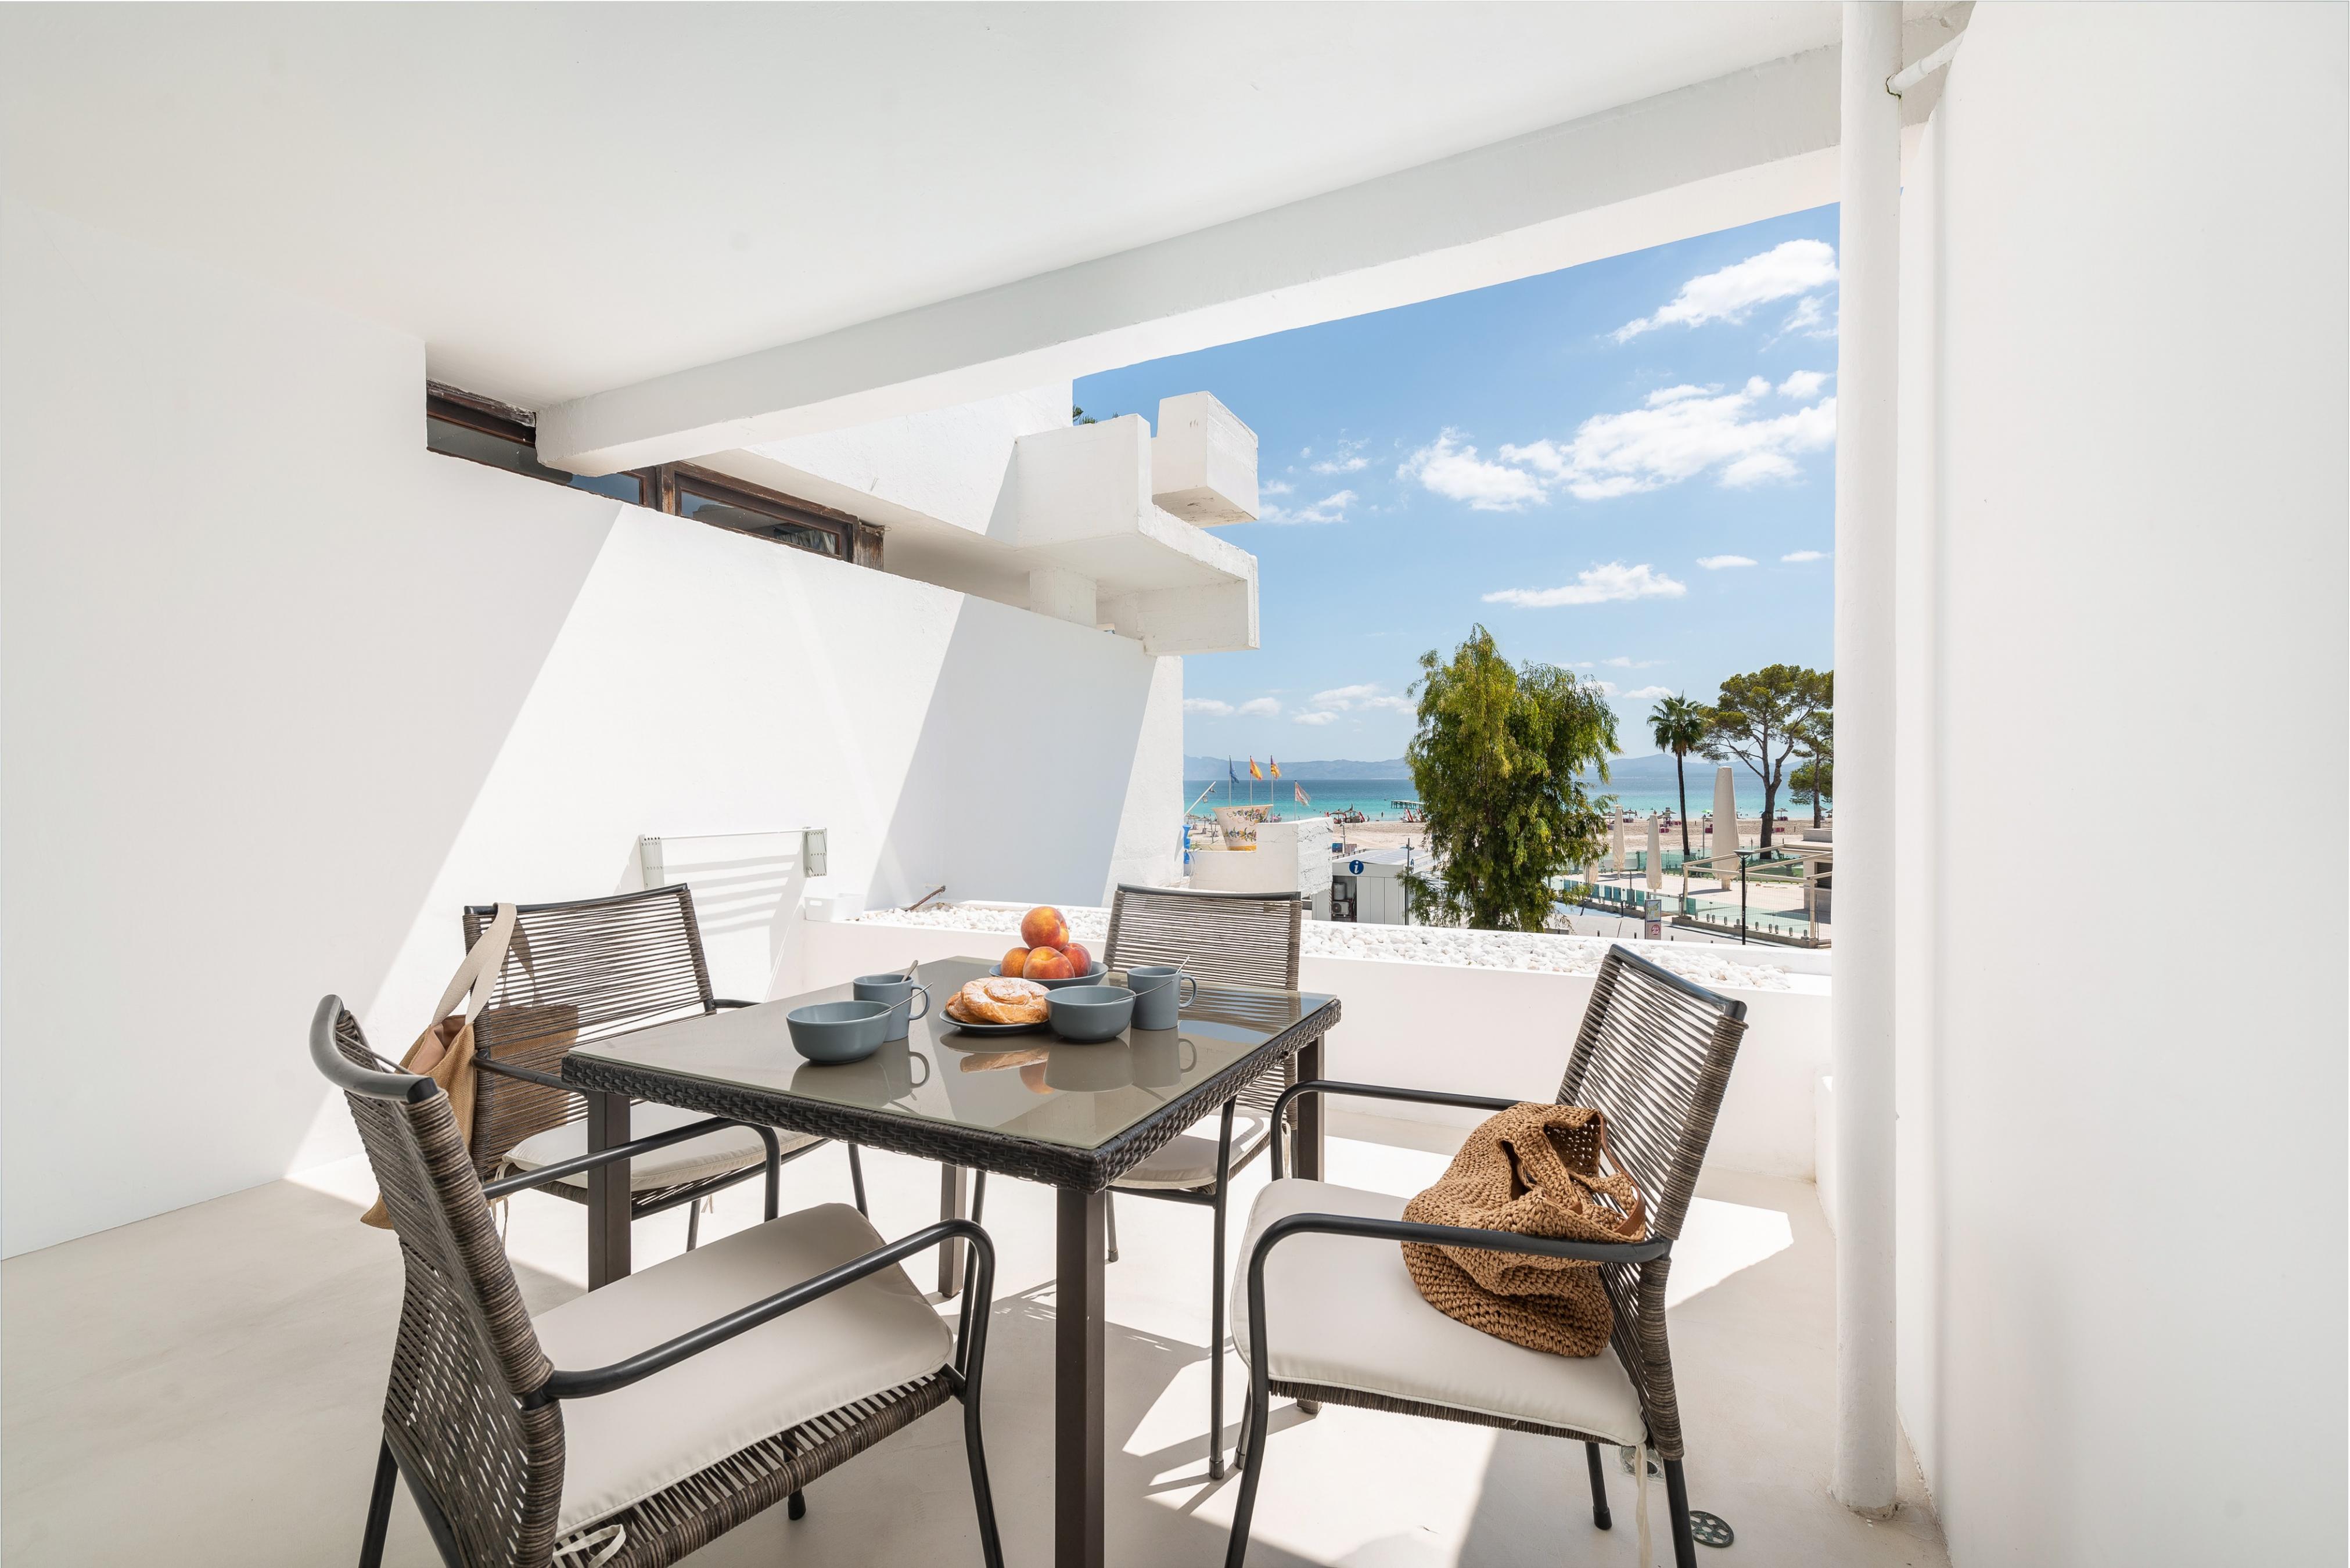 Property Image 1 - SA NACRA - Fantastic and modern apartment with sea views and 50 meters from the beach. Ideal for couples. 